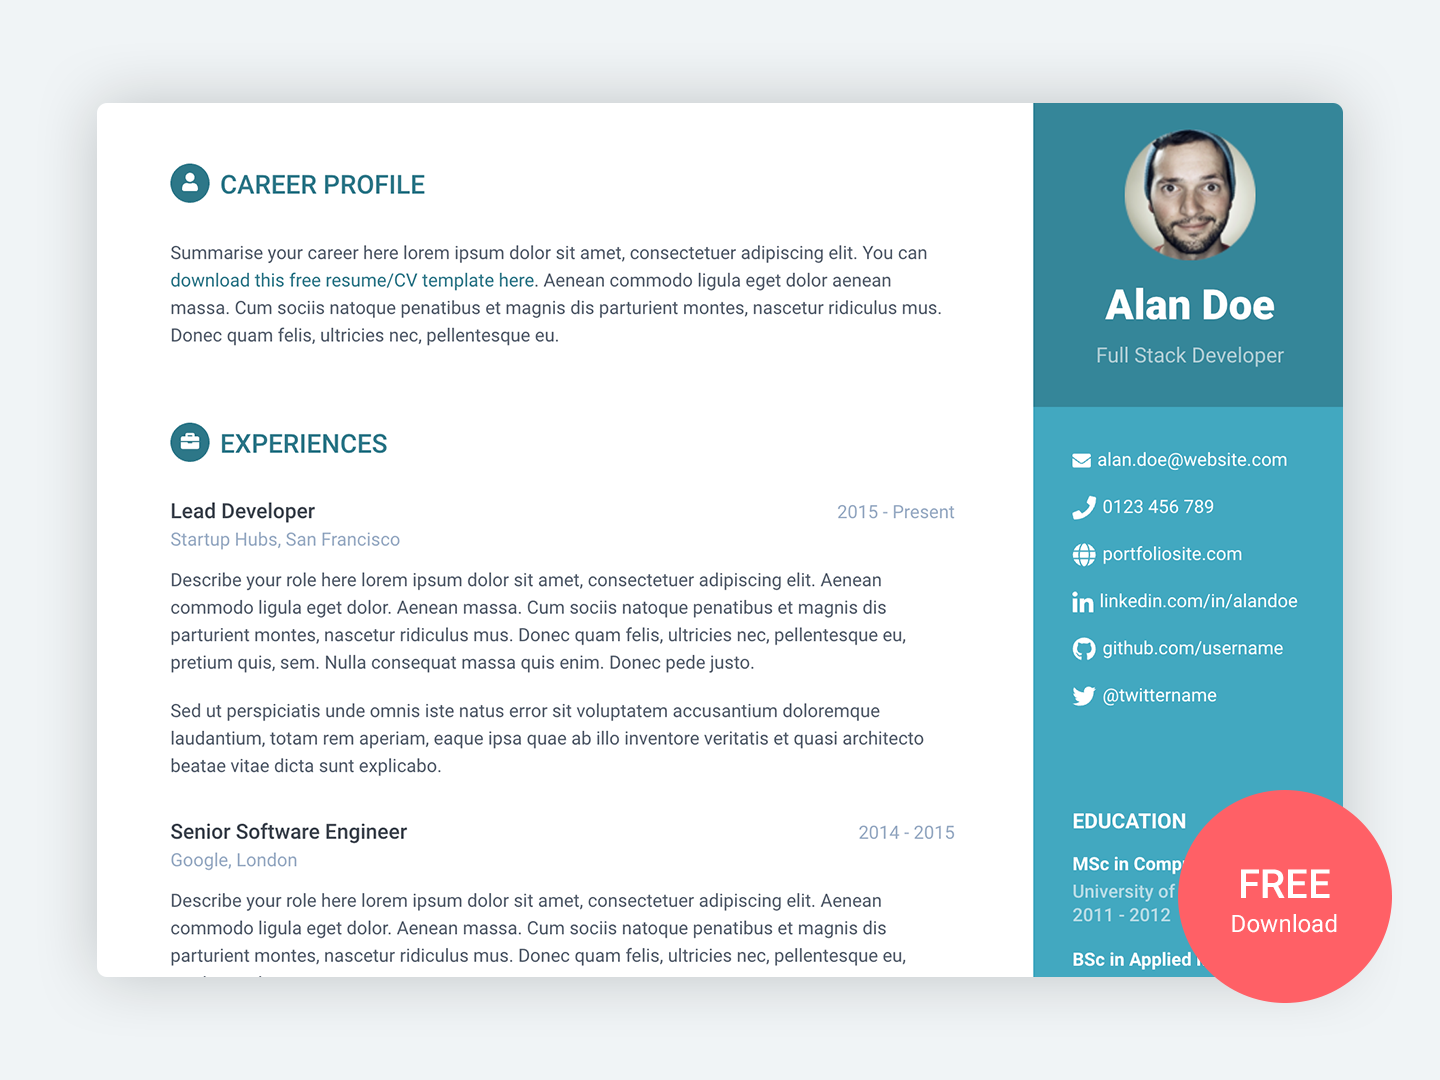 Orbit Free Bootstrap 4 Resume/CV Template for Developers by Xiaoying